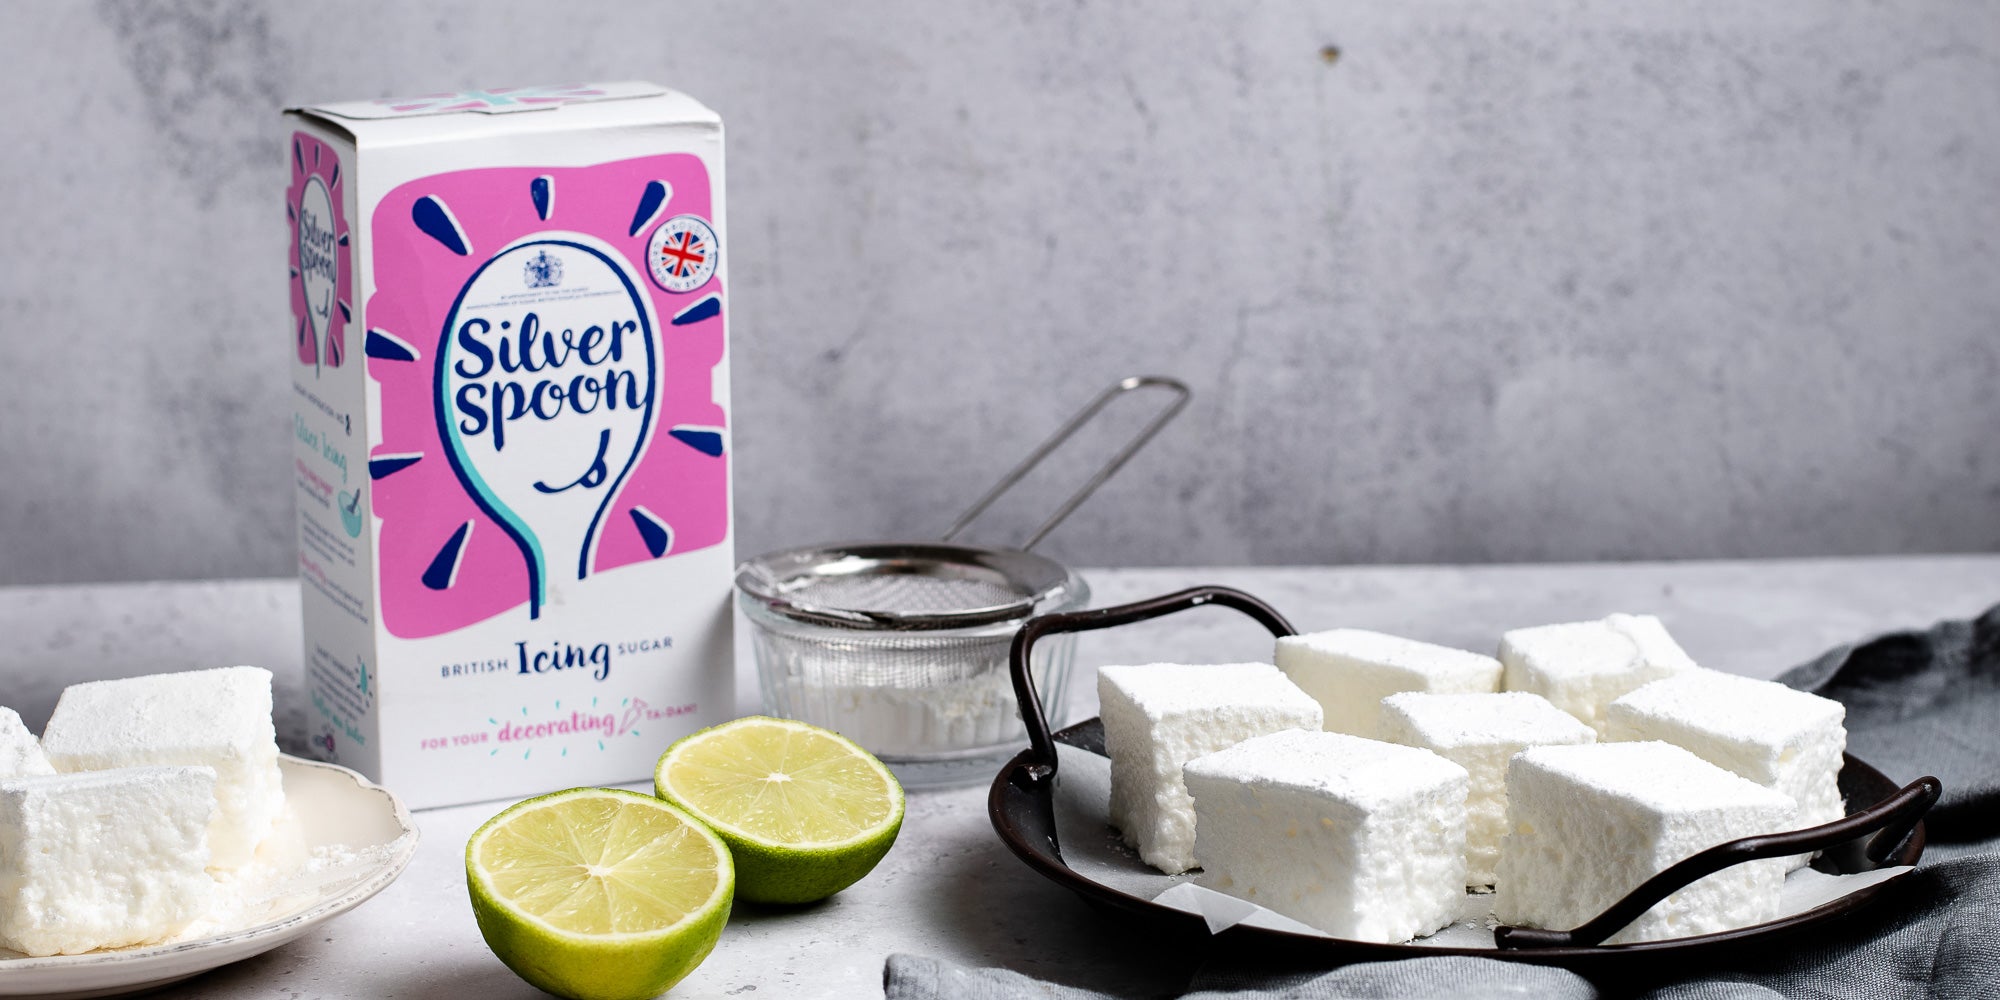 Gin & Tonic Marshmallows next to a box of Silver Spoon Icing Sugar with sliced lime